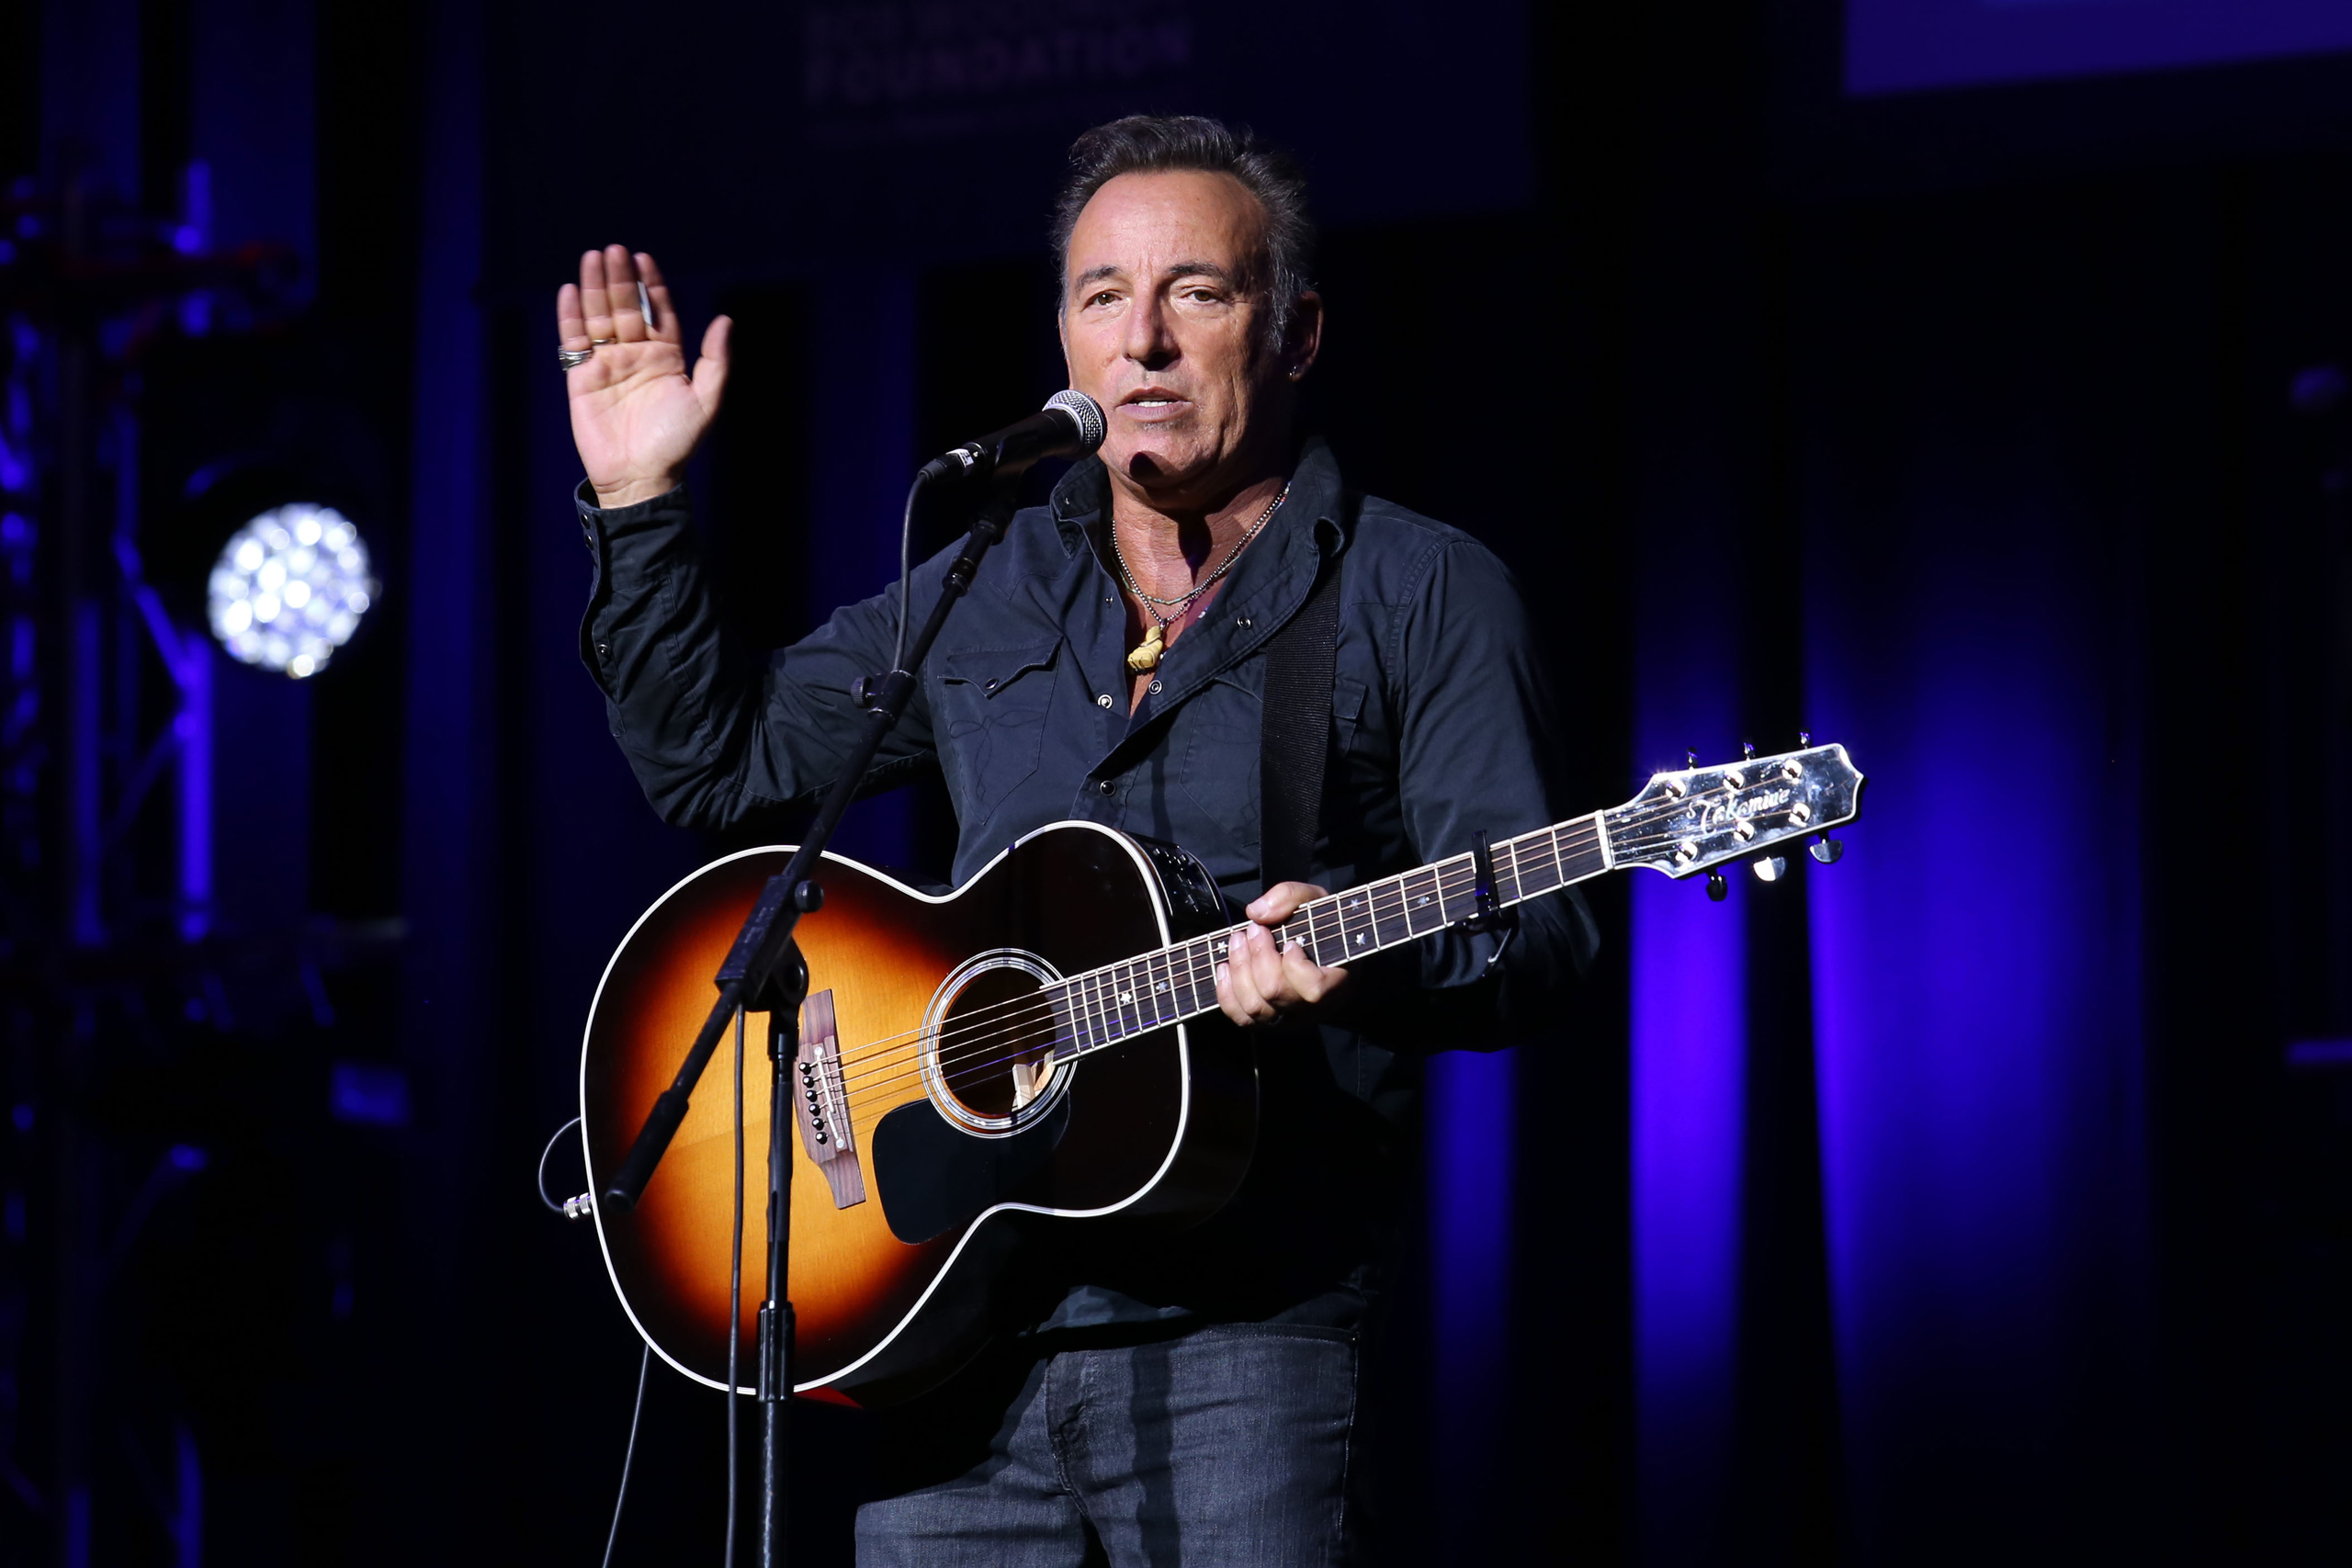 Bruce Springsteen performs at the 9th Annual Stand Up For Heroes event, presented by the New York Comedy Festival and The Bob Woodruff Foundation, at the Theater at Madison Square Garden on Tuesday, Nov. 10, 2015, in New York. (Photo by Greg Allen/Invision/AP)